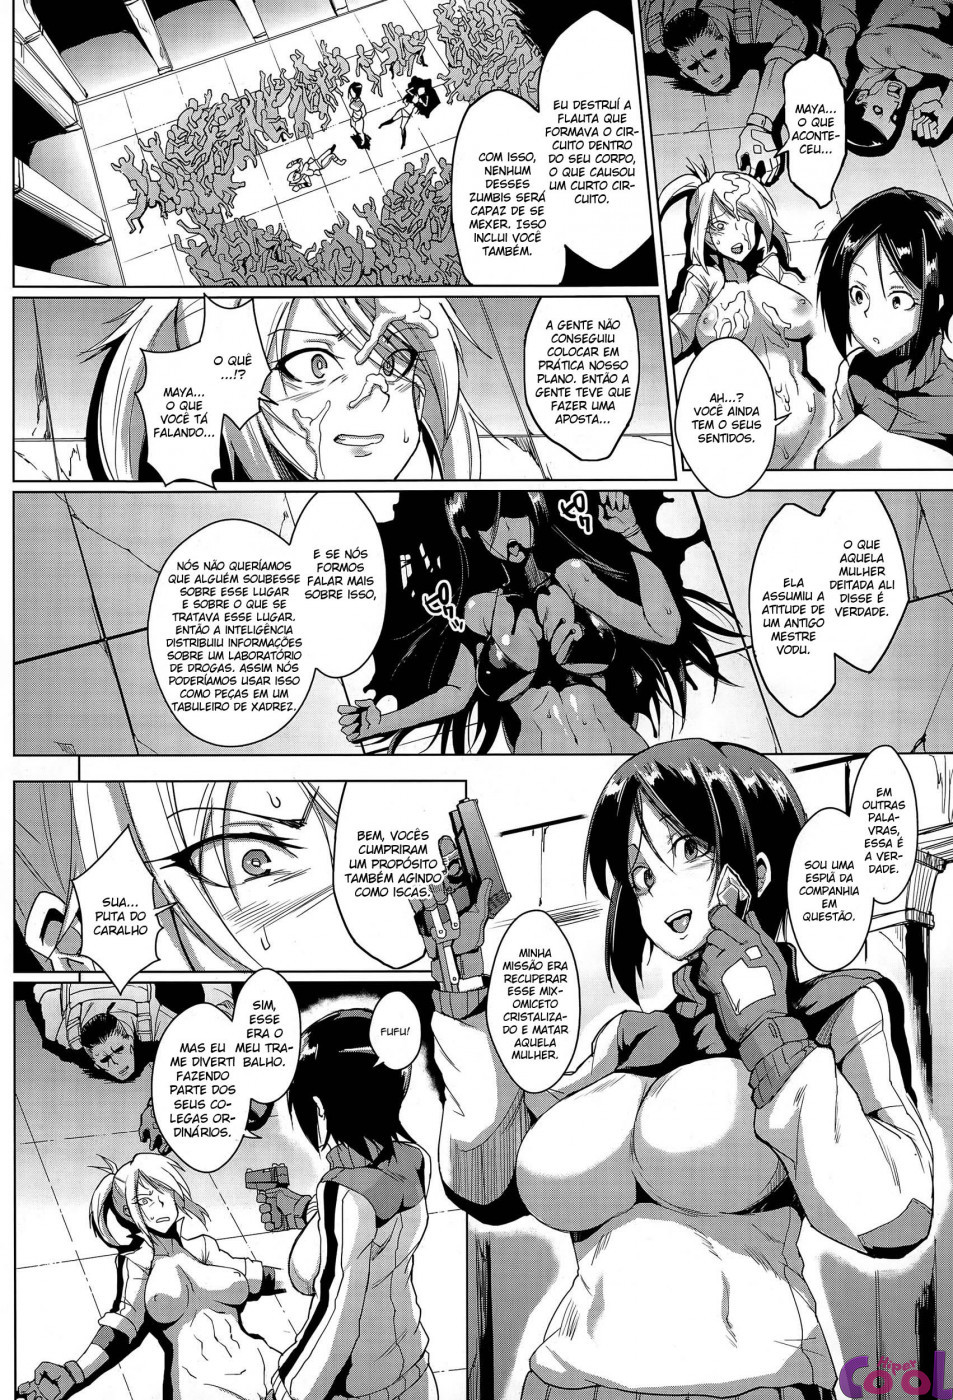 voodoo-squad-chuuhen-chapter-01-page-12.jpg